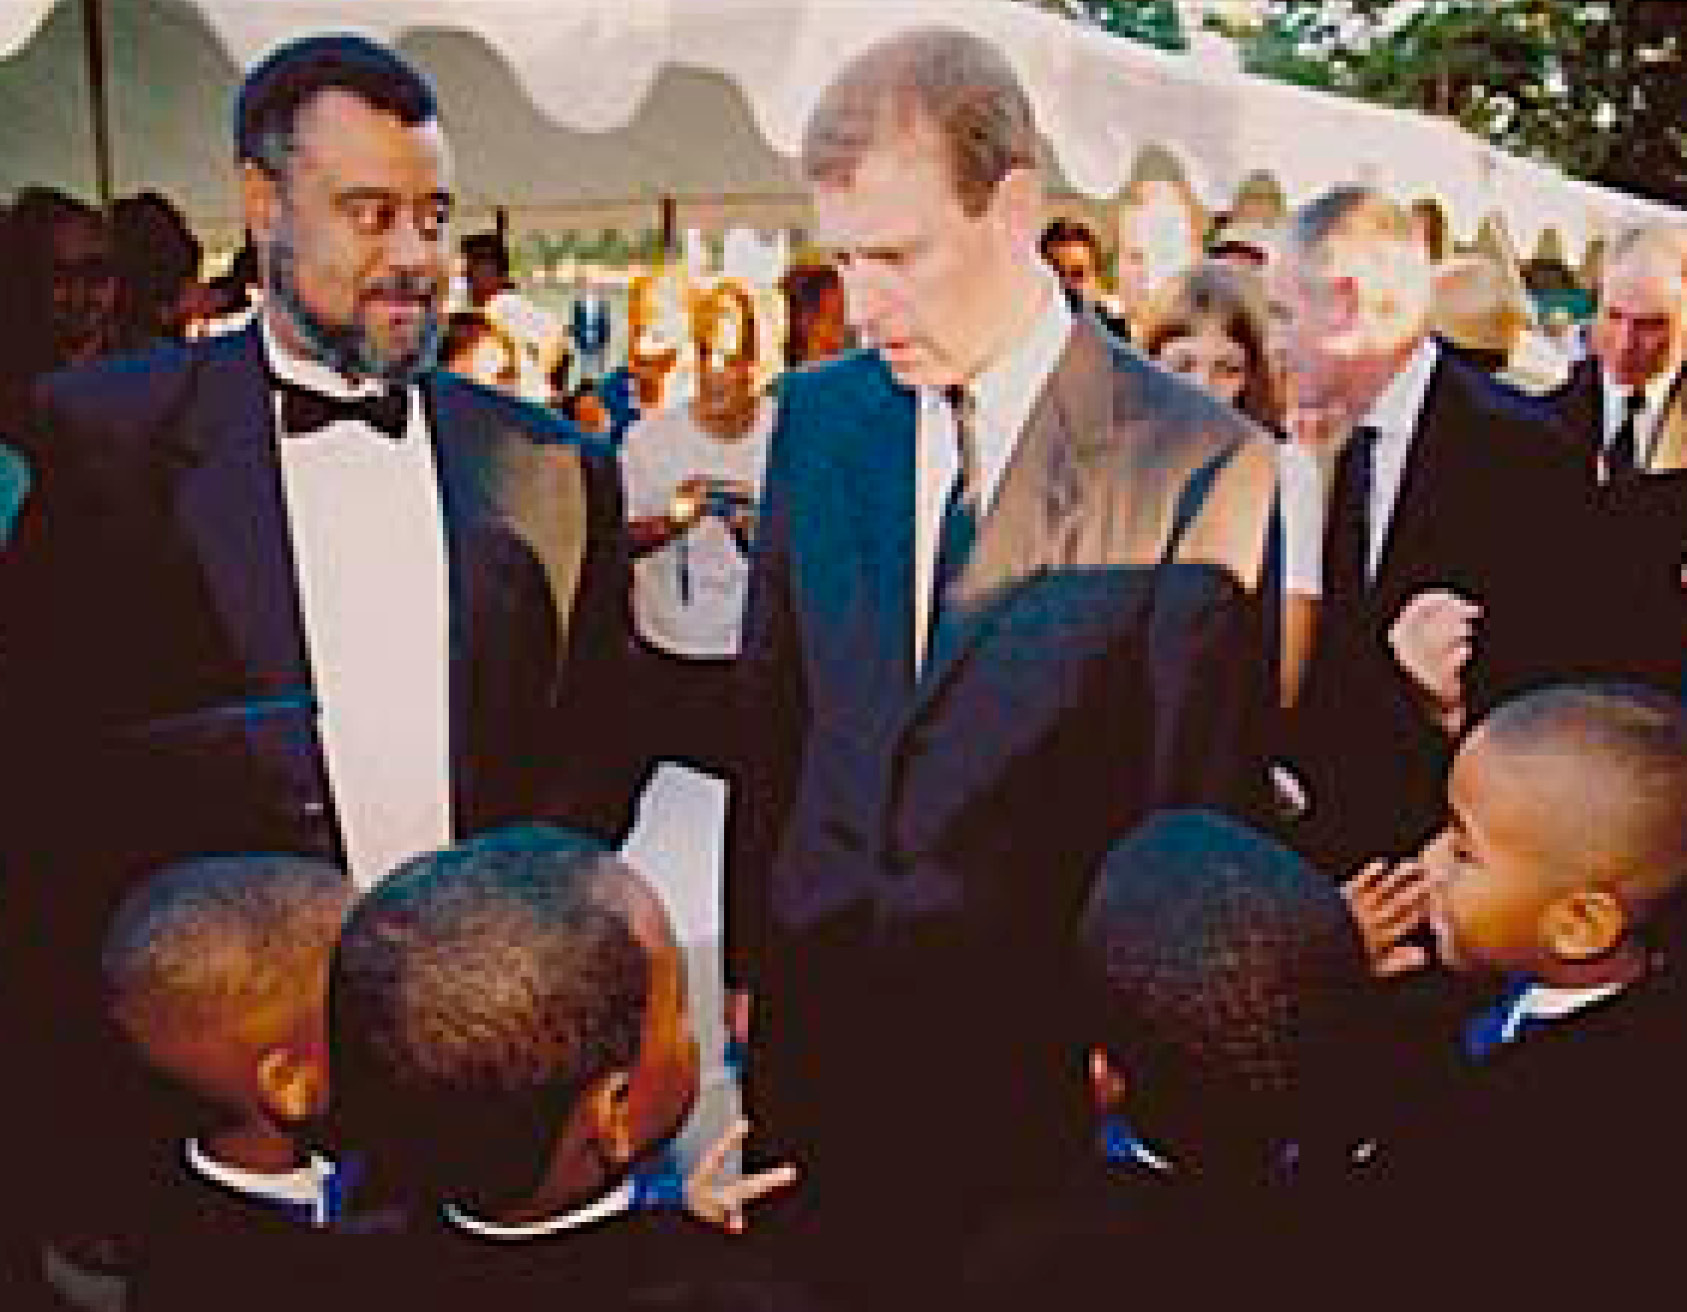 Prince Andrew of York, England with members of the Poughkeepsie Boys Choir, 2002.